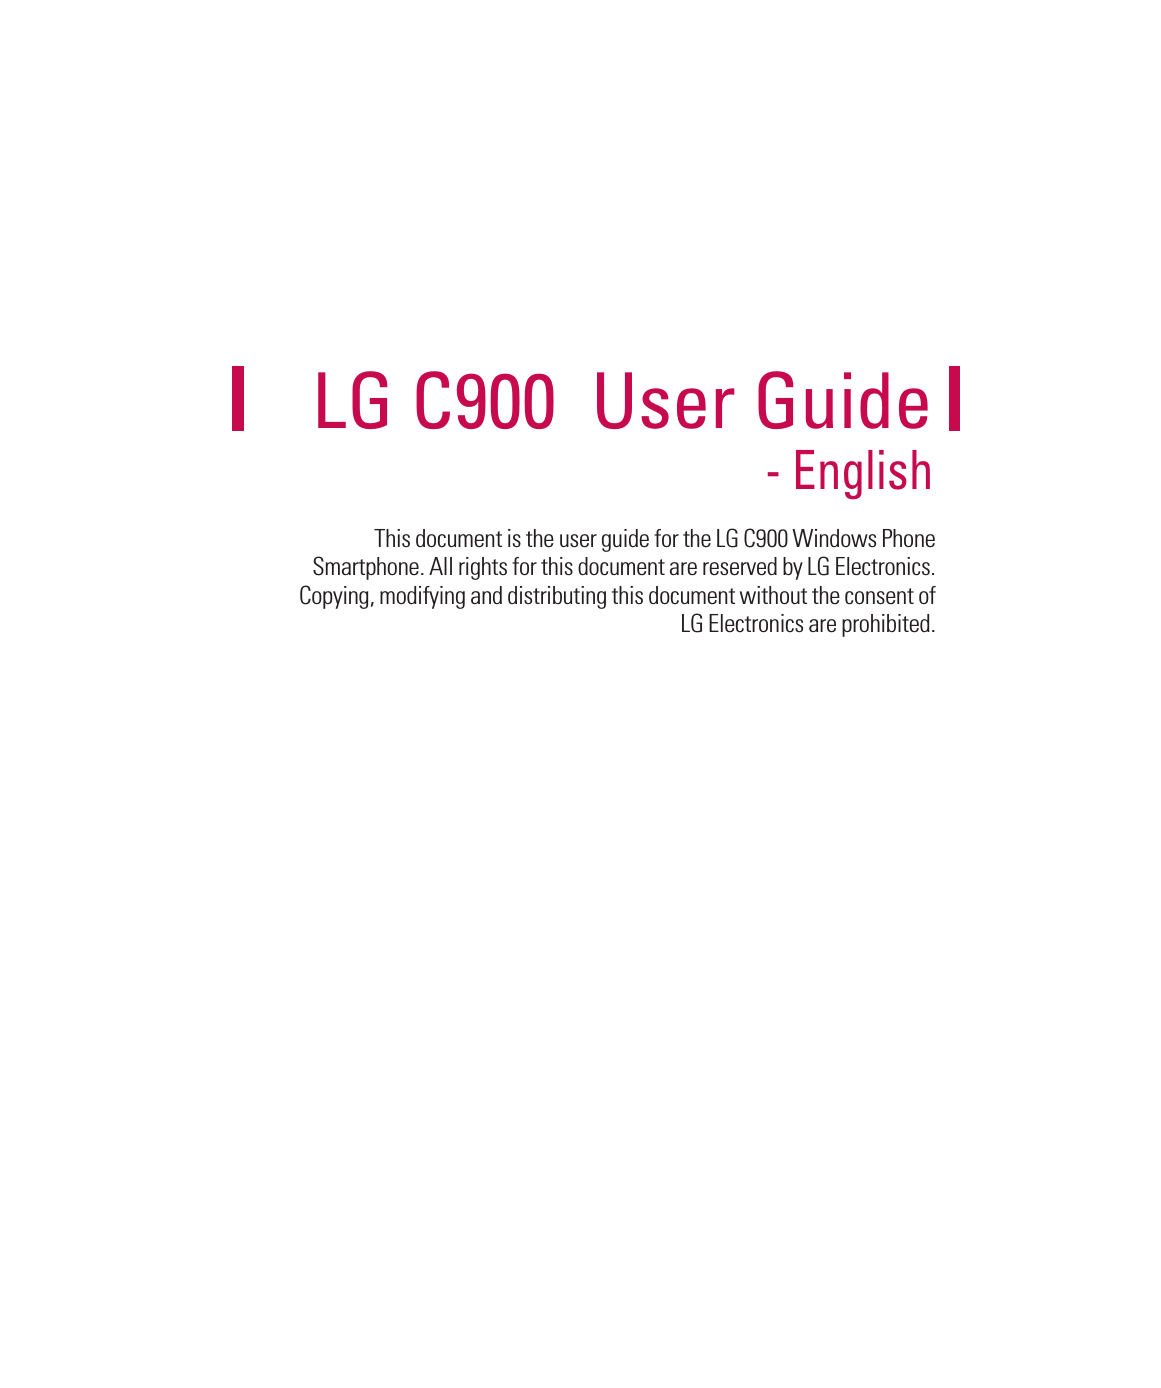 This document is the user guide for the LG C900 Windows Phone Smartphone. All rights for this document are reserved by LG Electronics. Copying, modifying and distributing this document without the consent of LG Electronics are prohibited.LG C900  User Guide- English